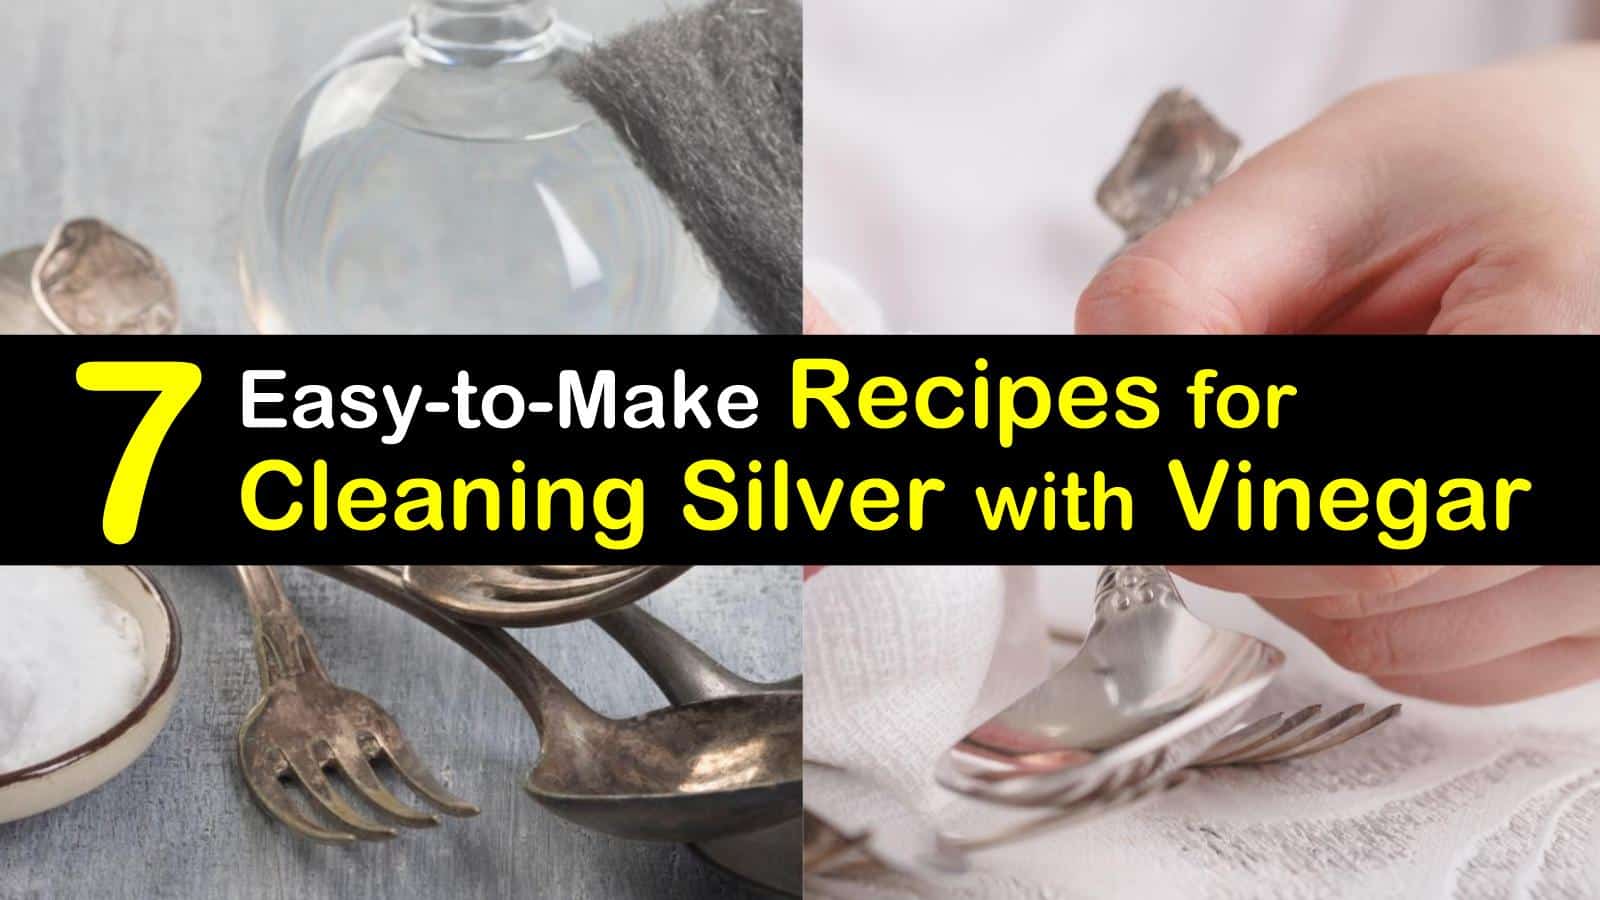 12 Easy-to-Make Recipes to Clean Silver with Vinegar